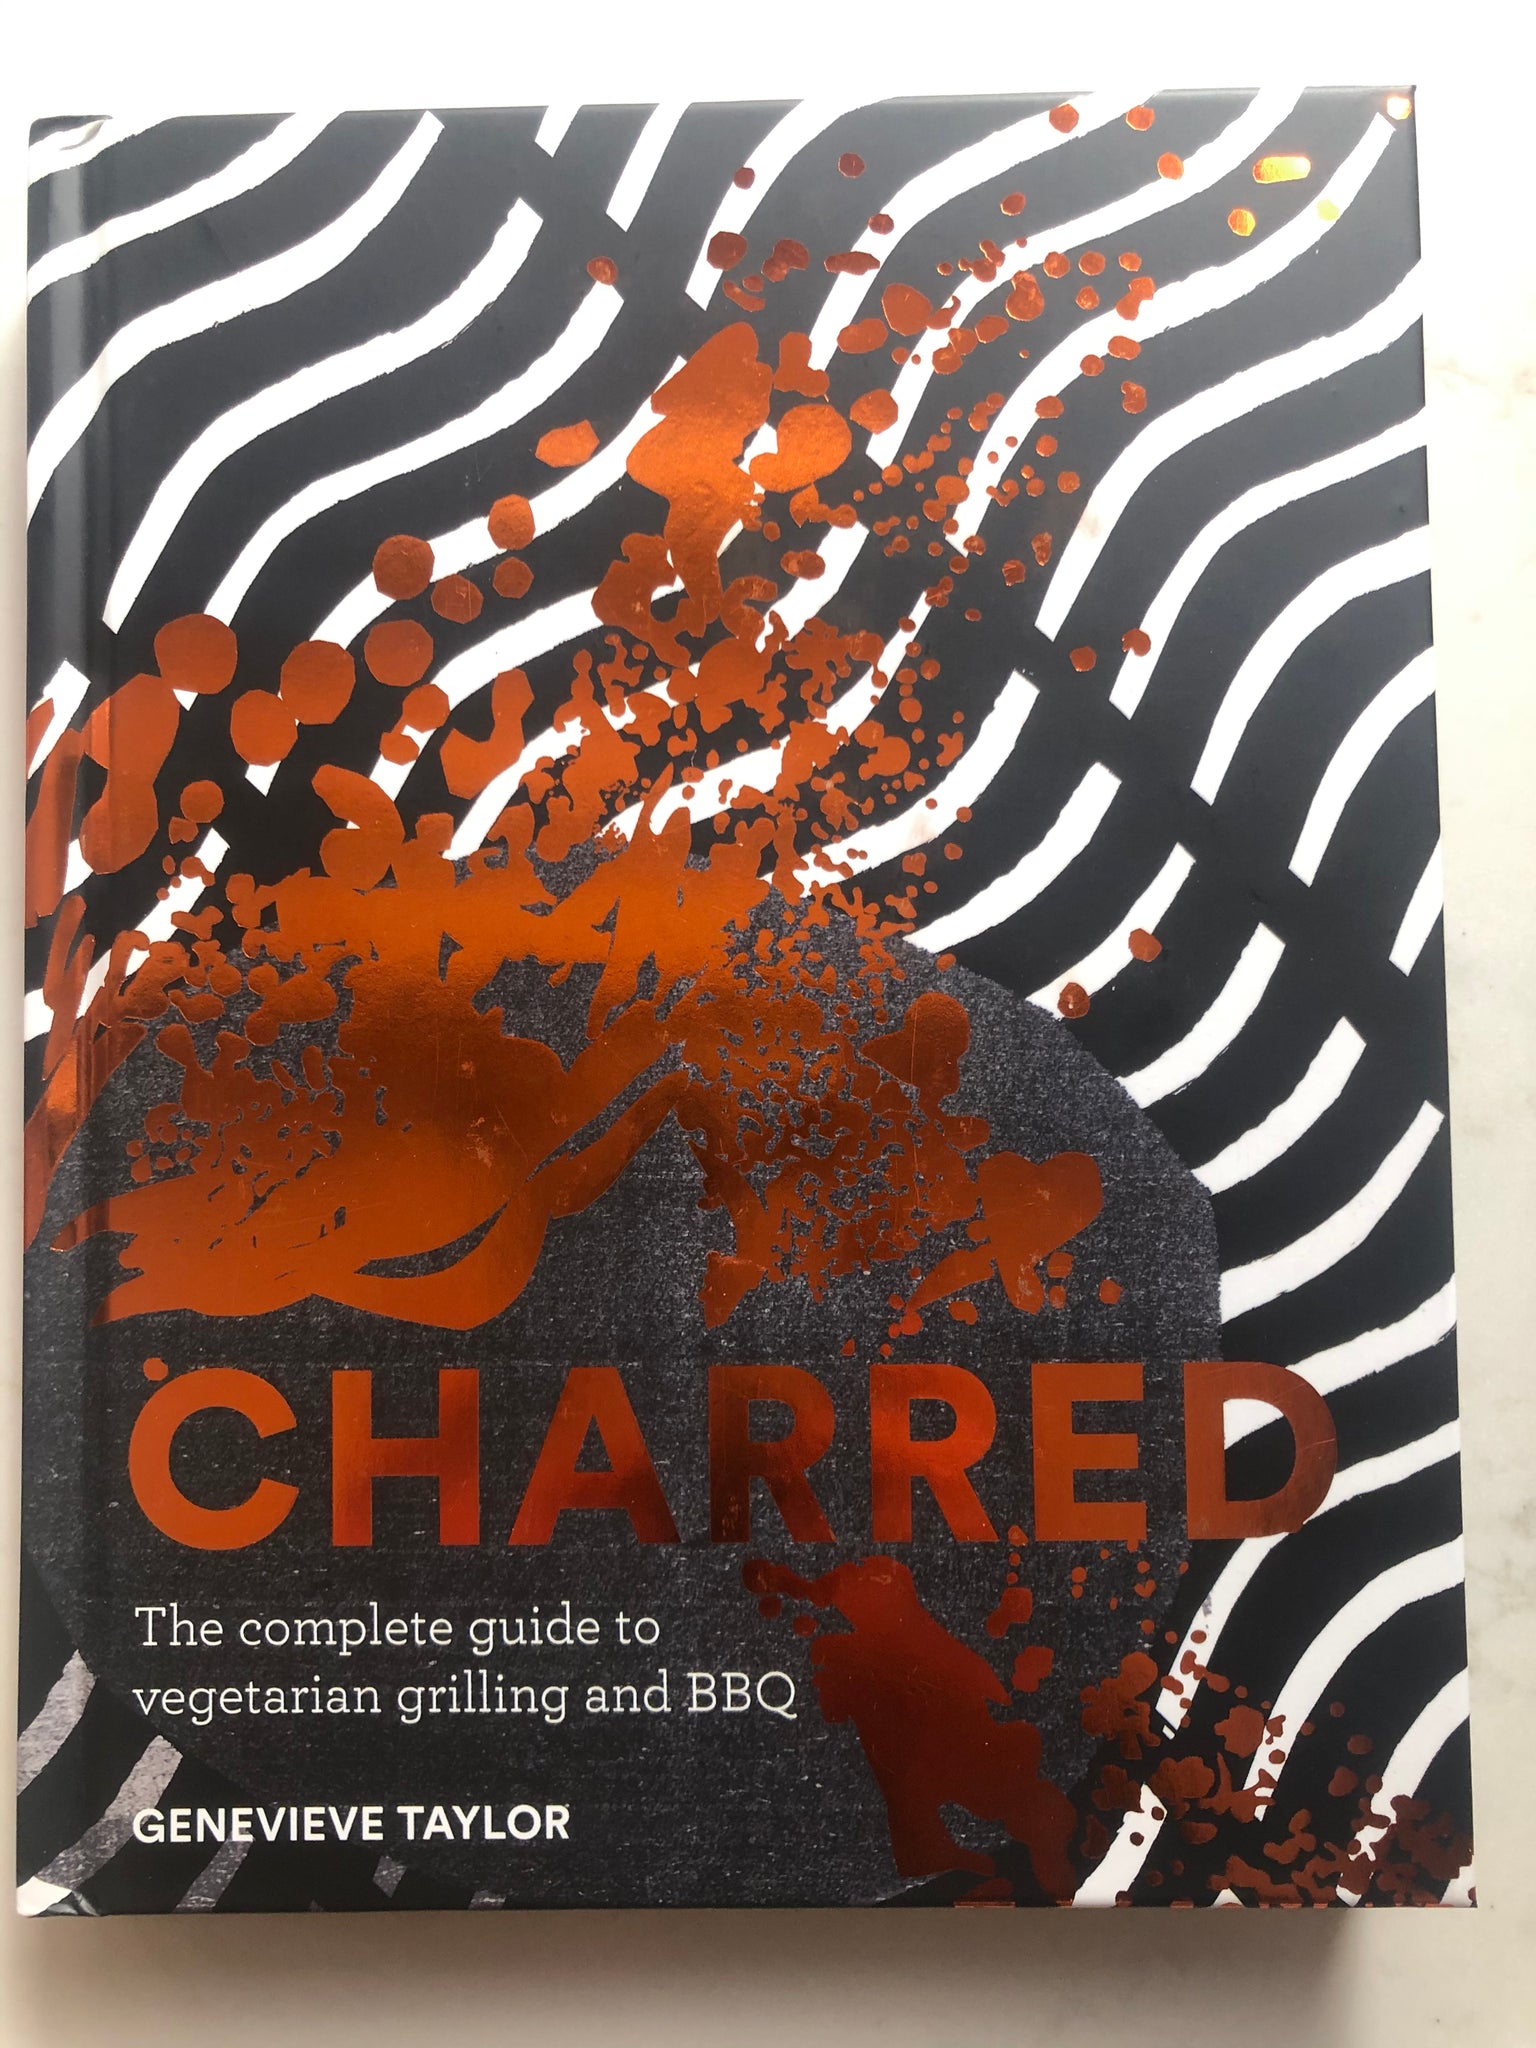 Charred - Genevieve Taylor